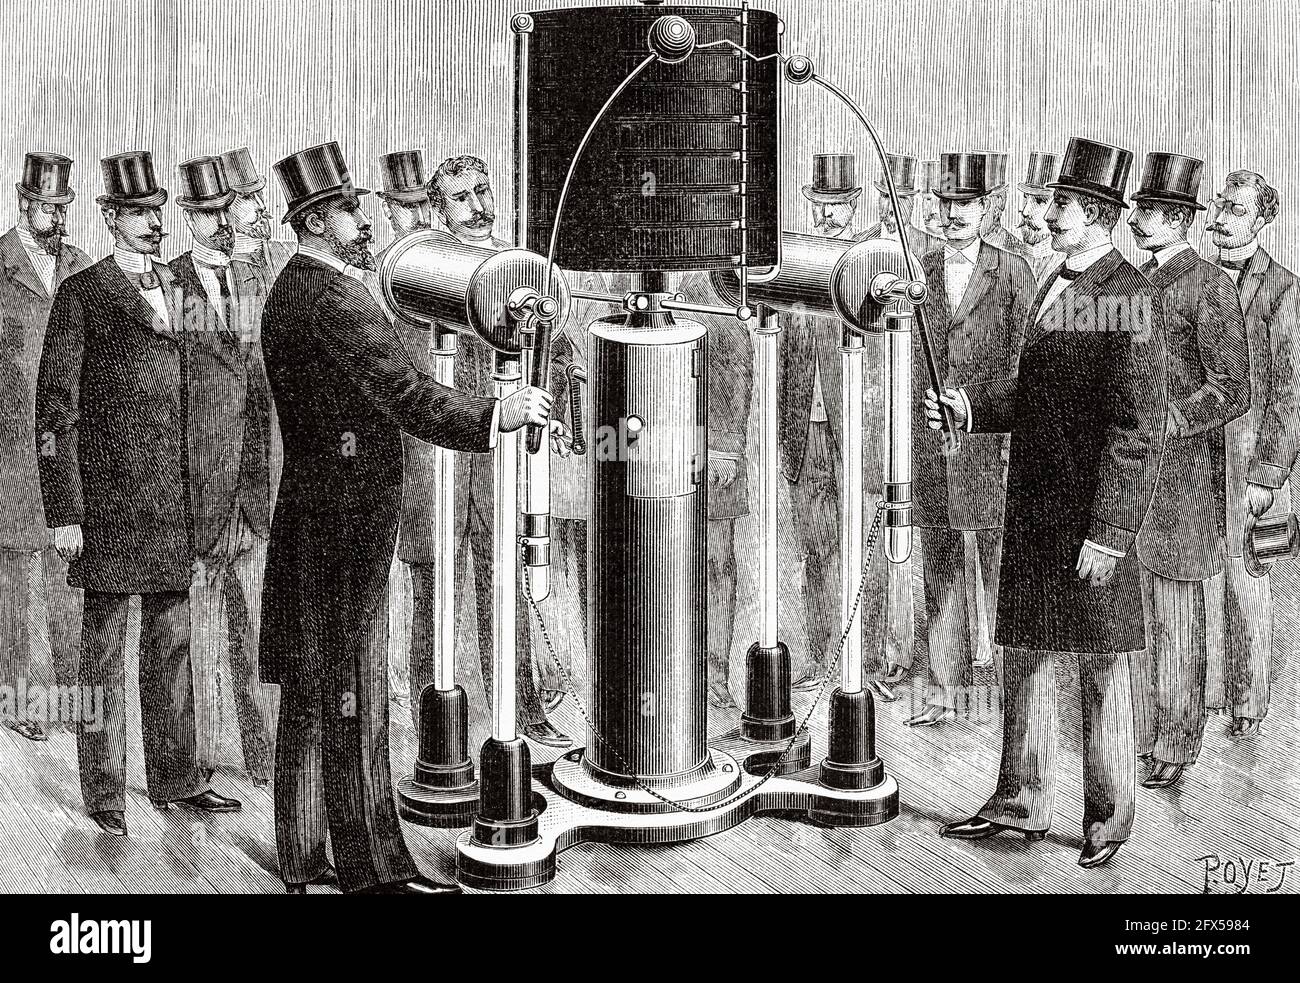 Demonstration of the Wimshurst high voltage electrical machine. Cylindrical model electrostatic induction machines without sectors built by Bonetti. Old 19th century engraved illustration from La Nature 1893 Stock Photo